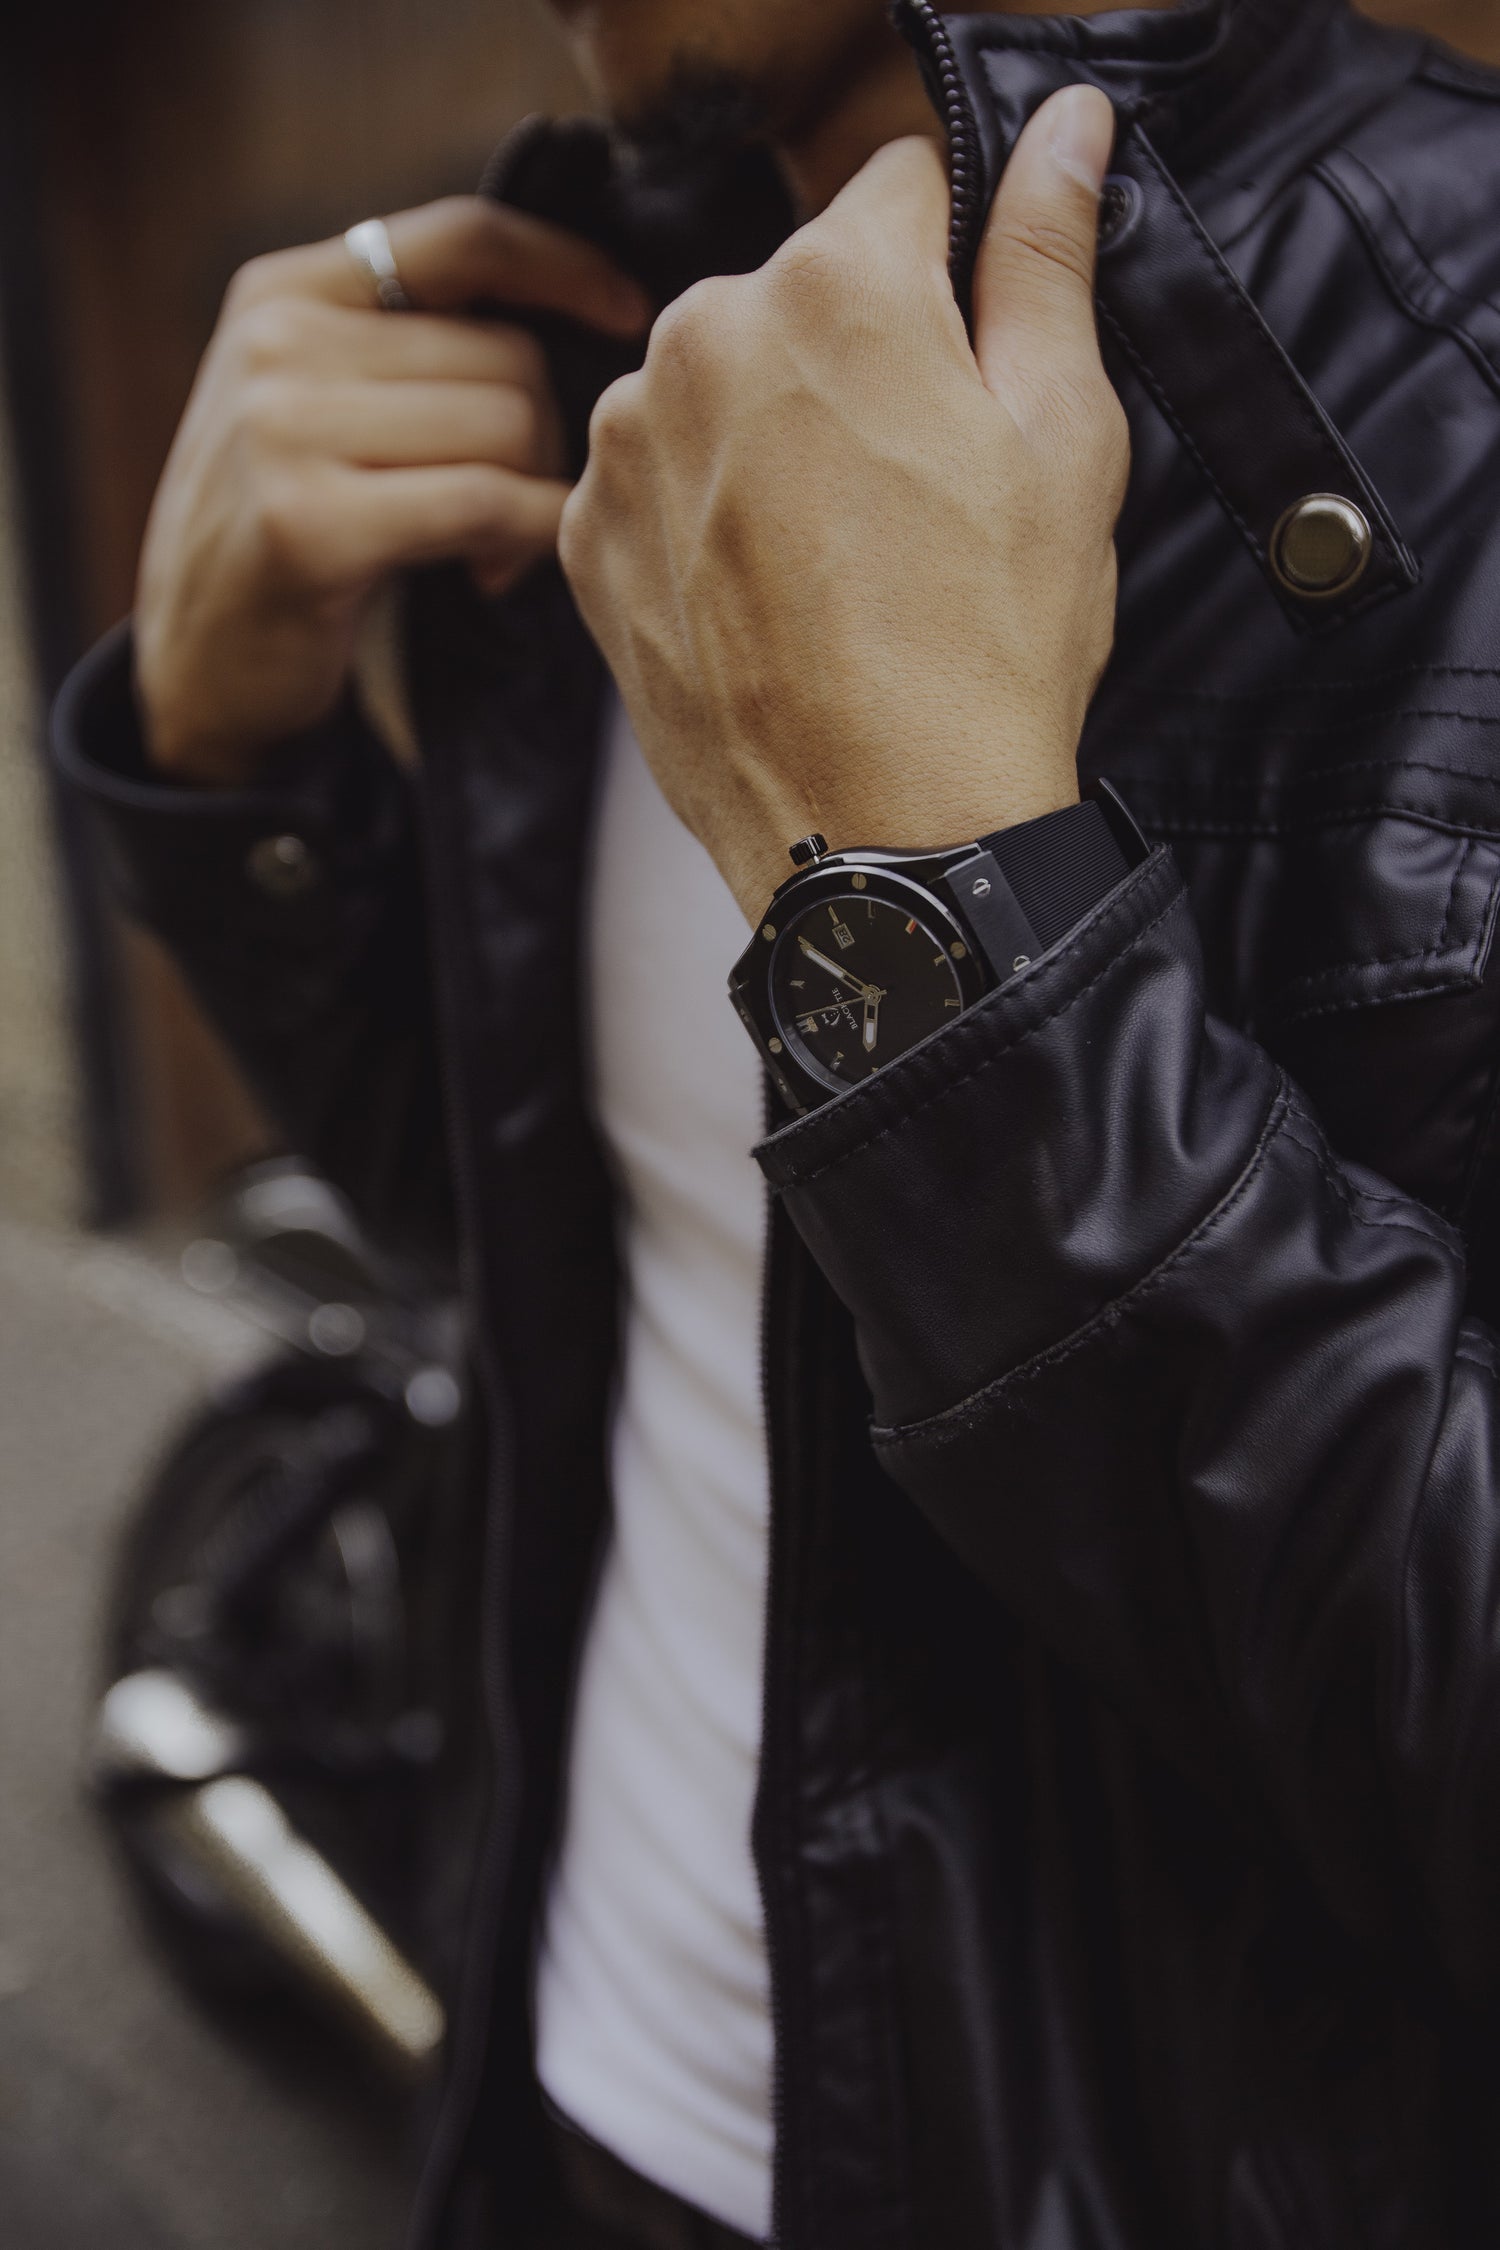 Black Goes with Everything - The Most Versatile Watch Color for You